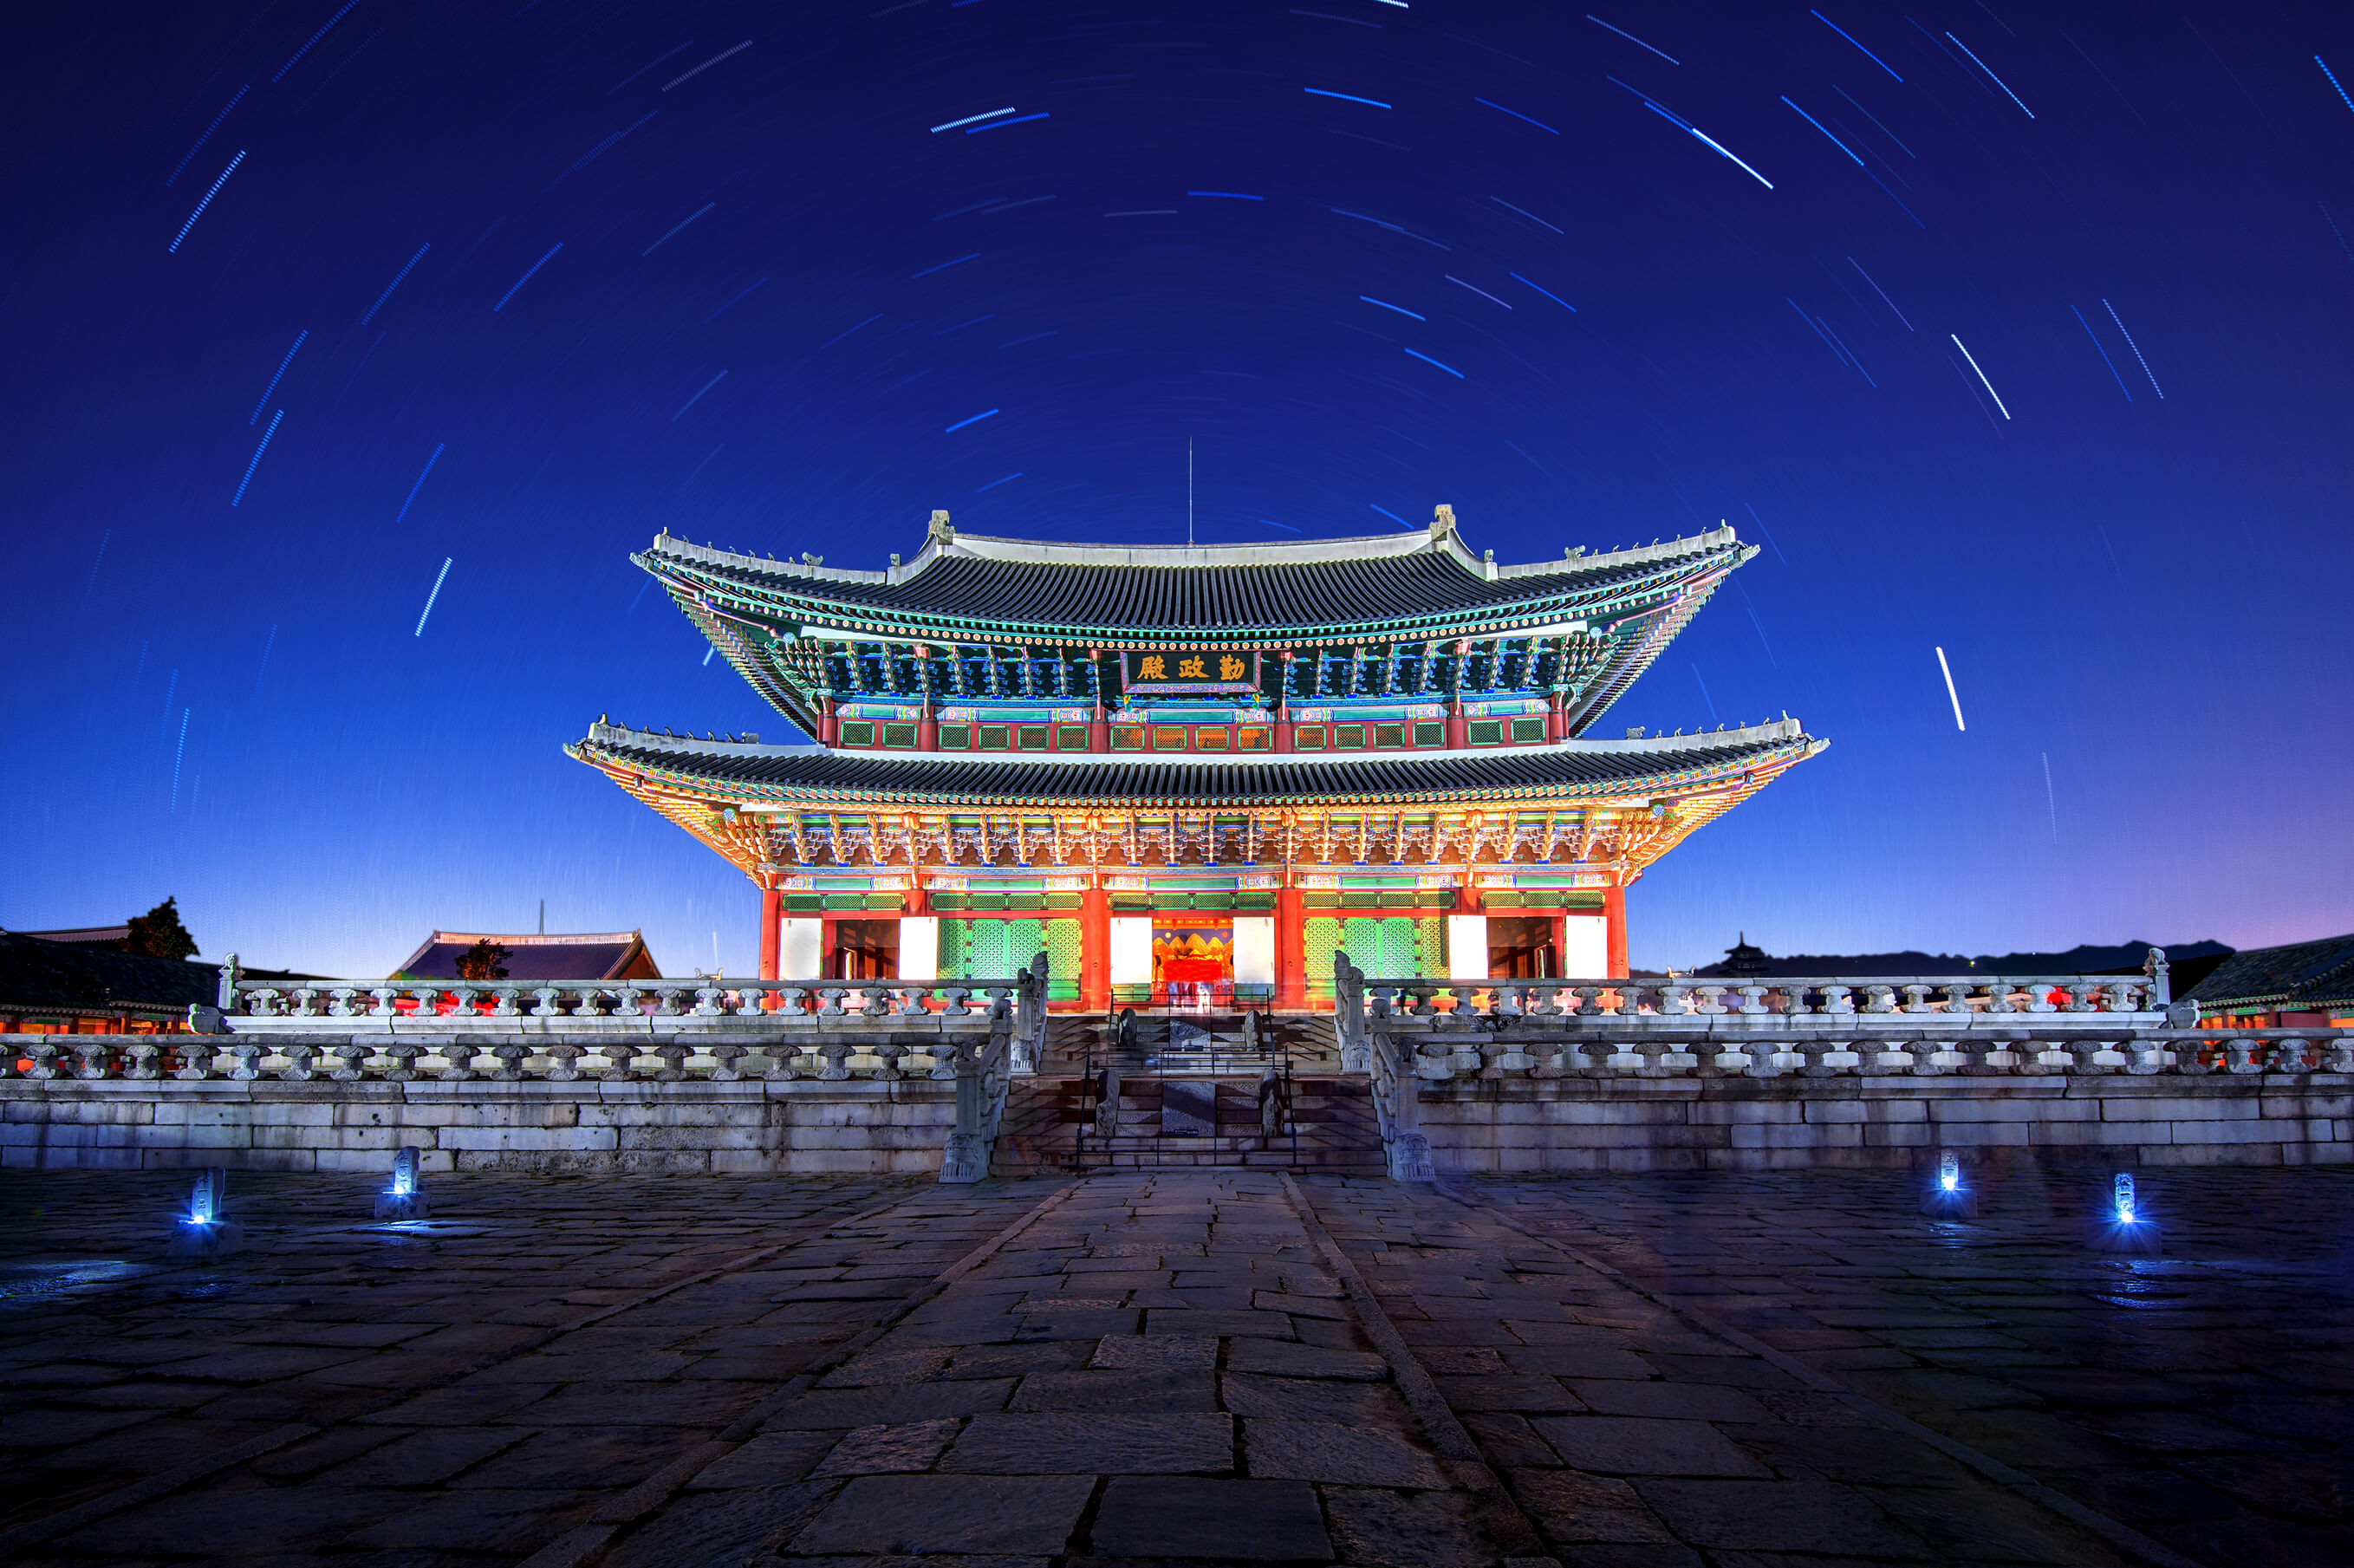 Gyeongbokgung Palace - Things to see in Seoul